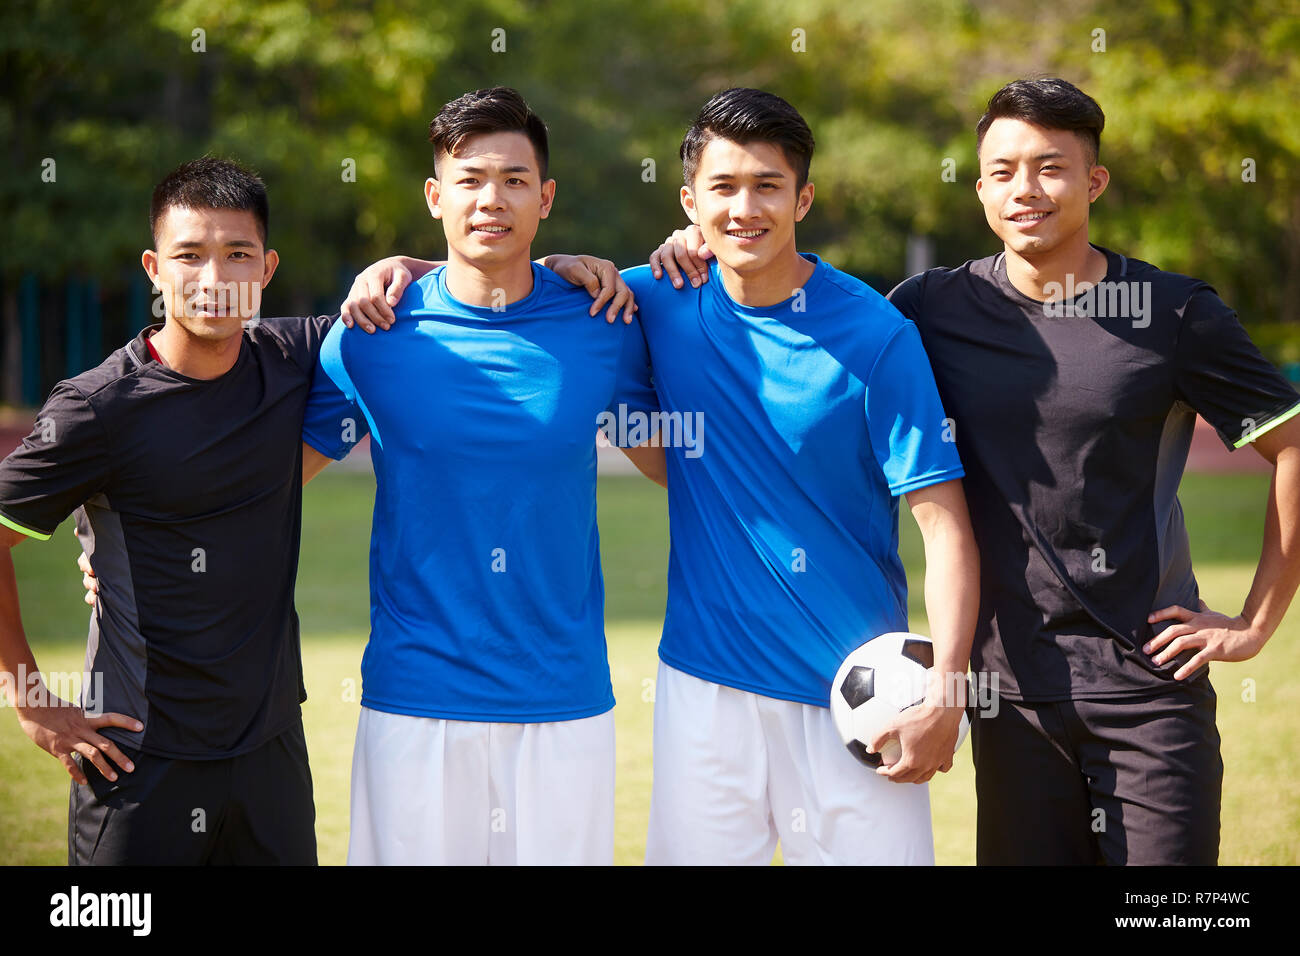 outdoor portrait of a team of young asian soccer football players Stock Photo